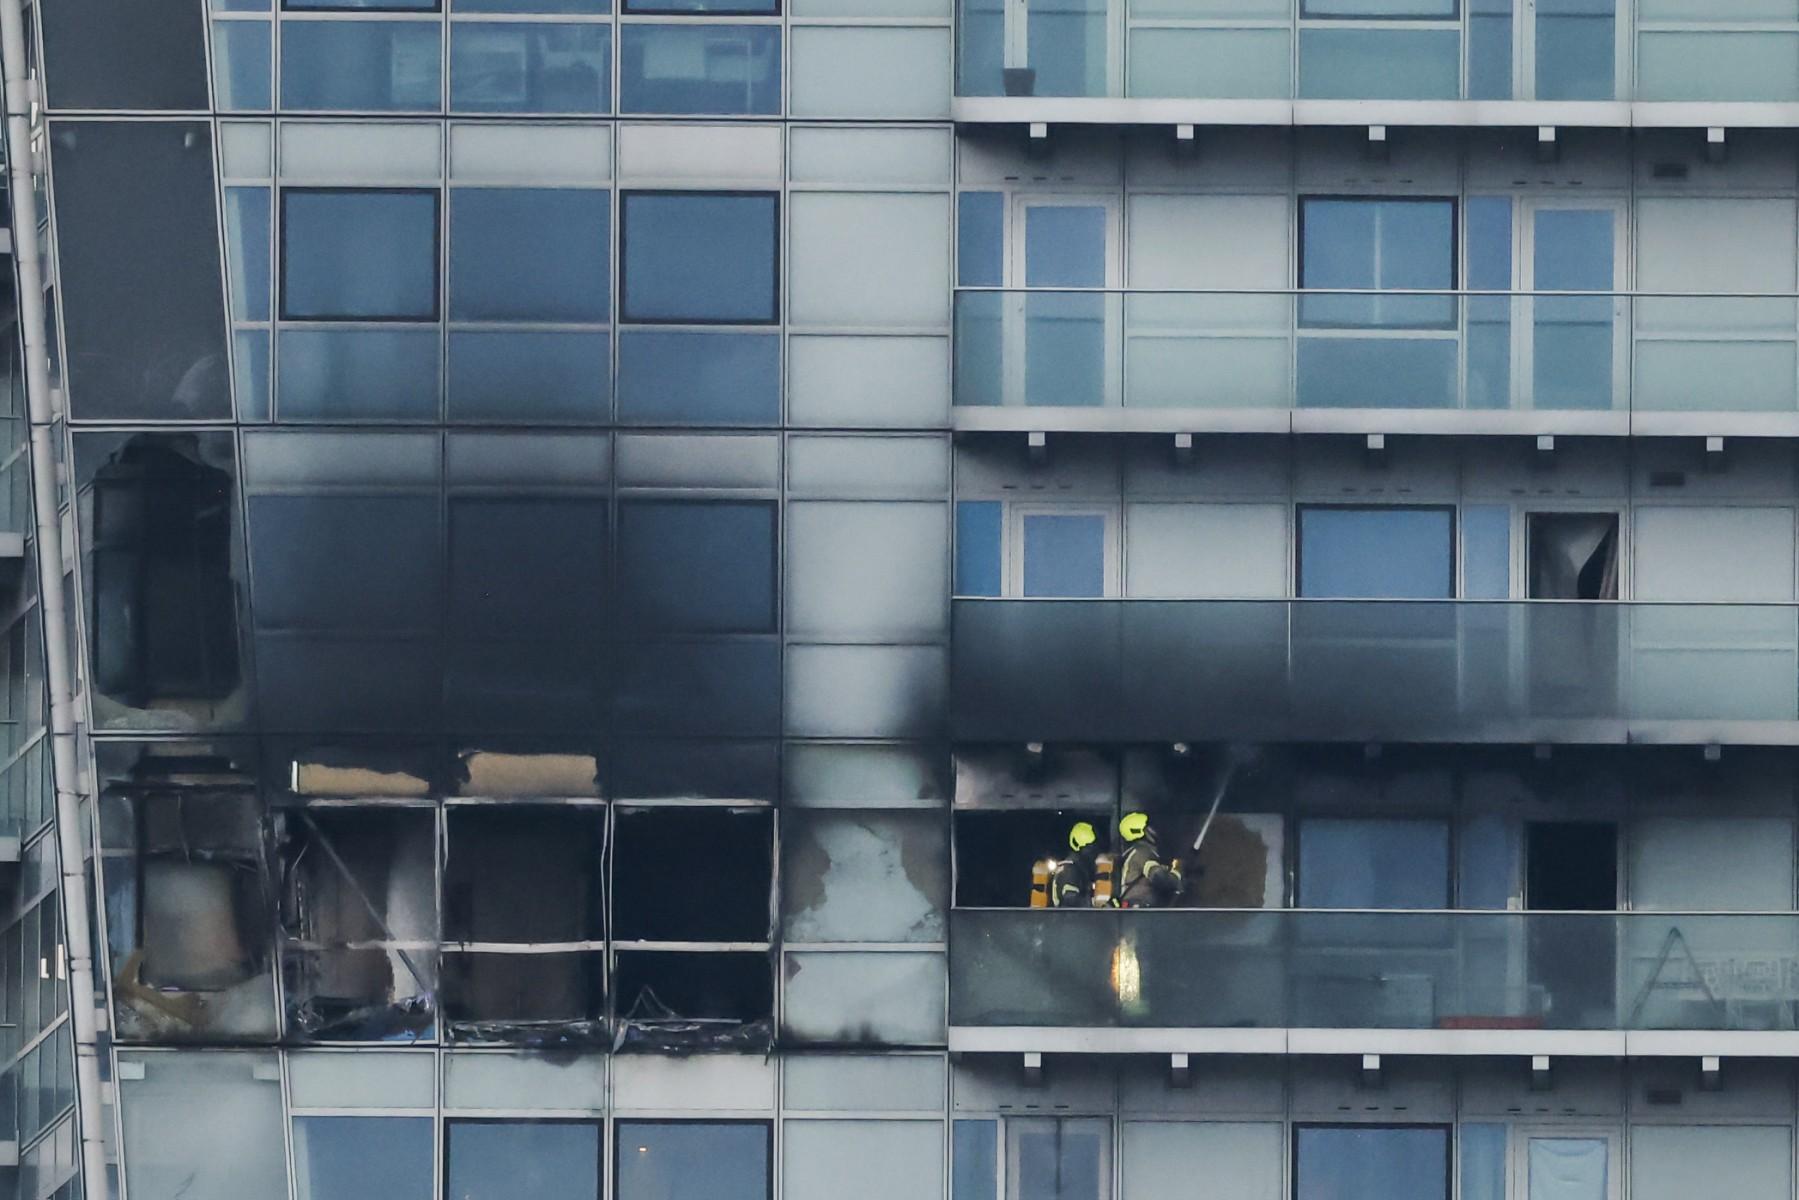 Firefighters extinguish the rest of a fire that broke out in the Relay Building, in Aldgate, east London, on March 7. Photo: AFP